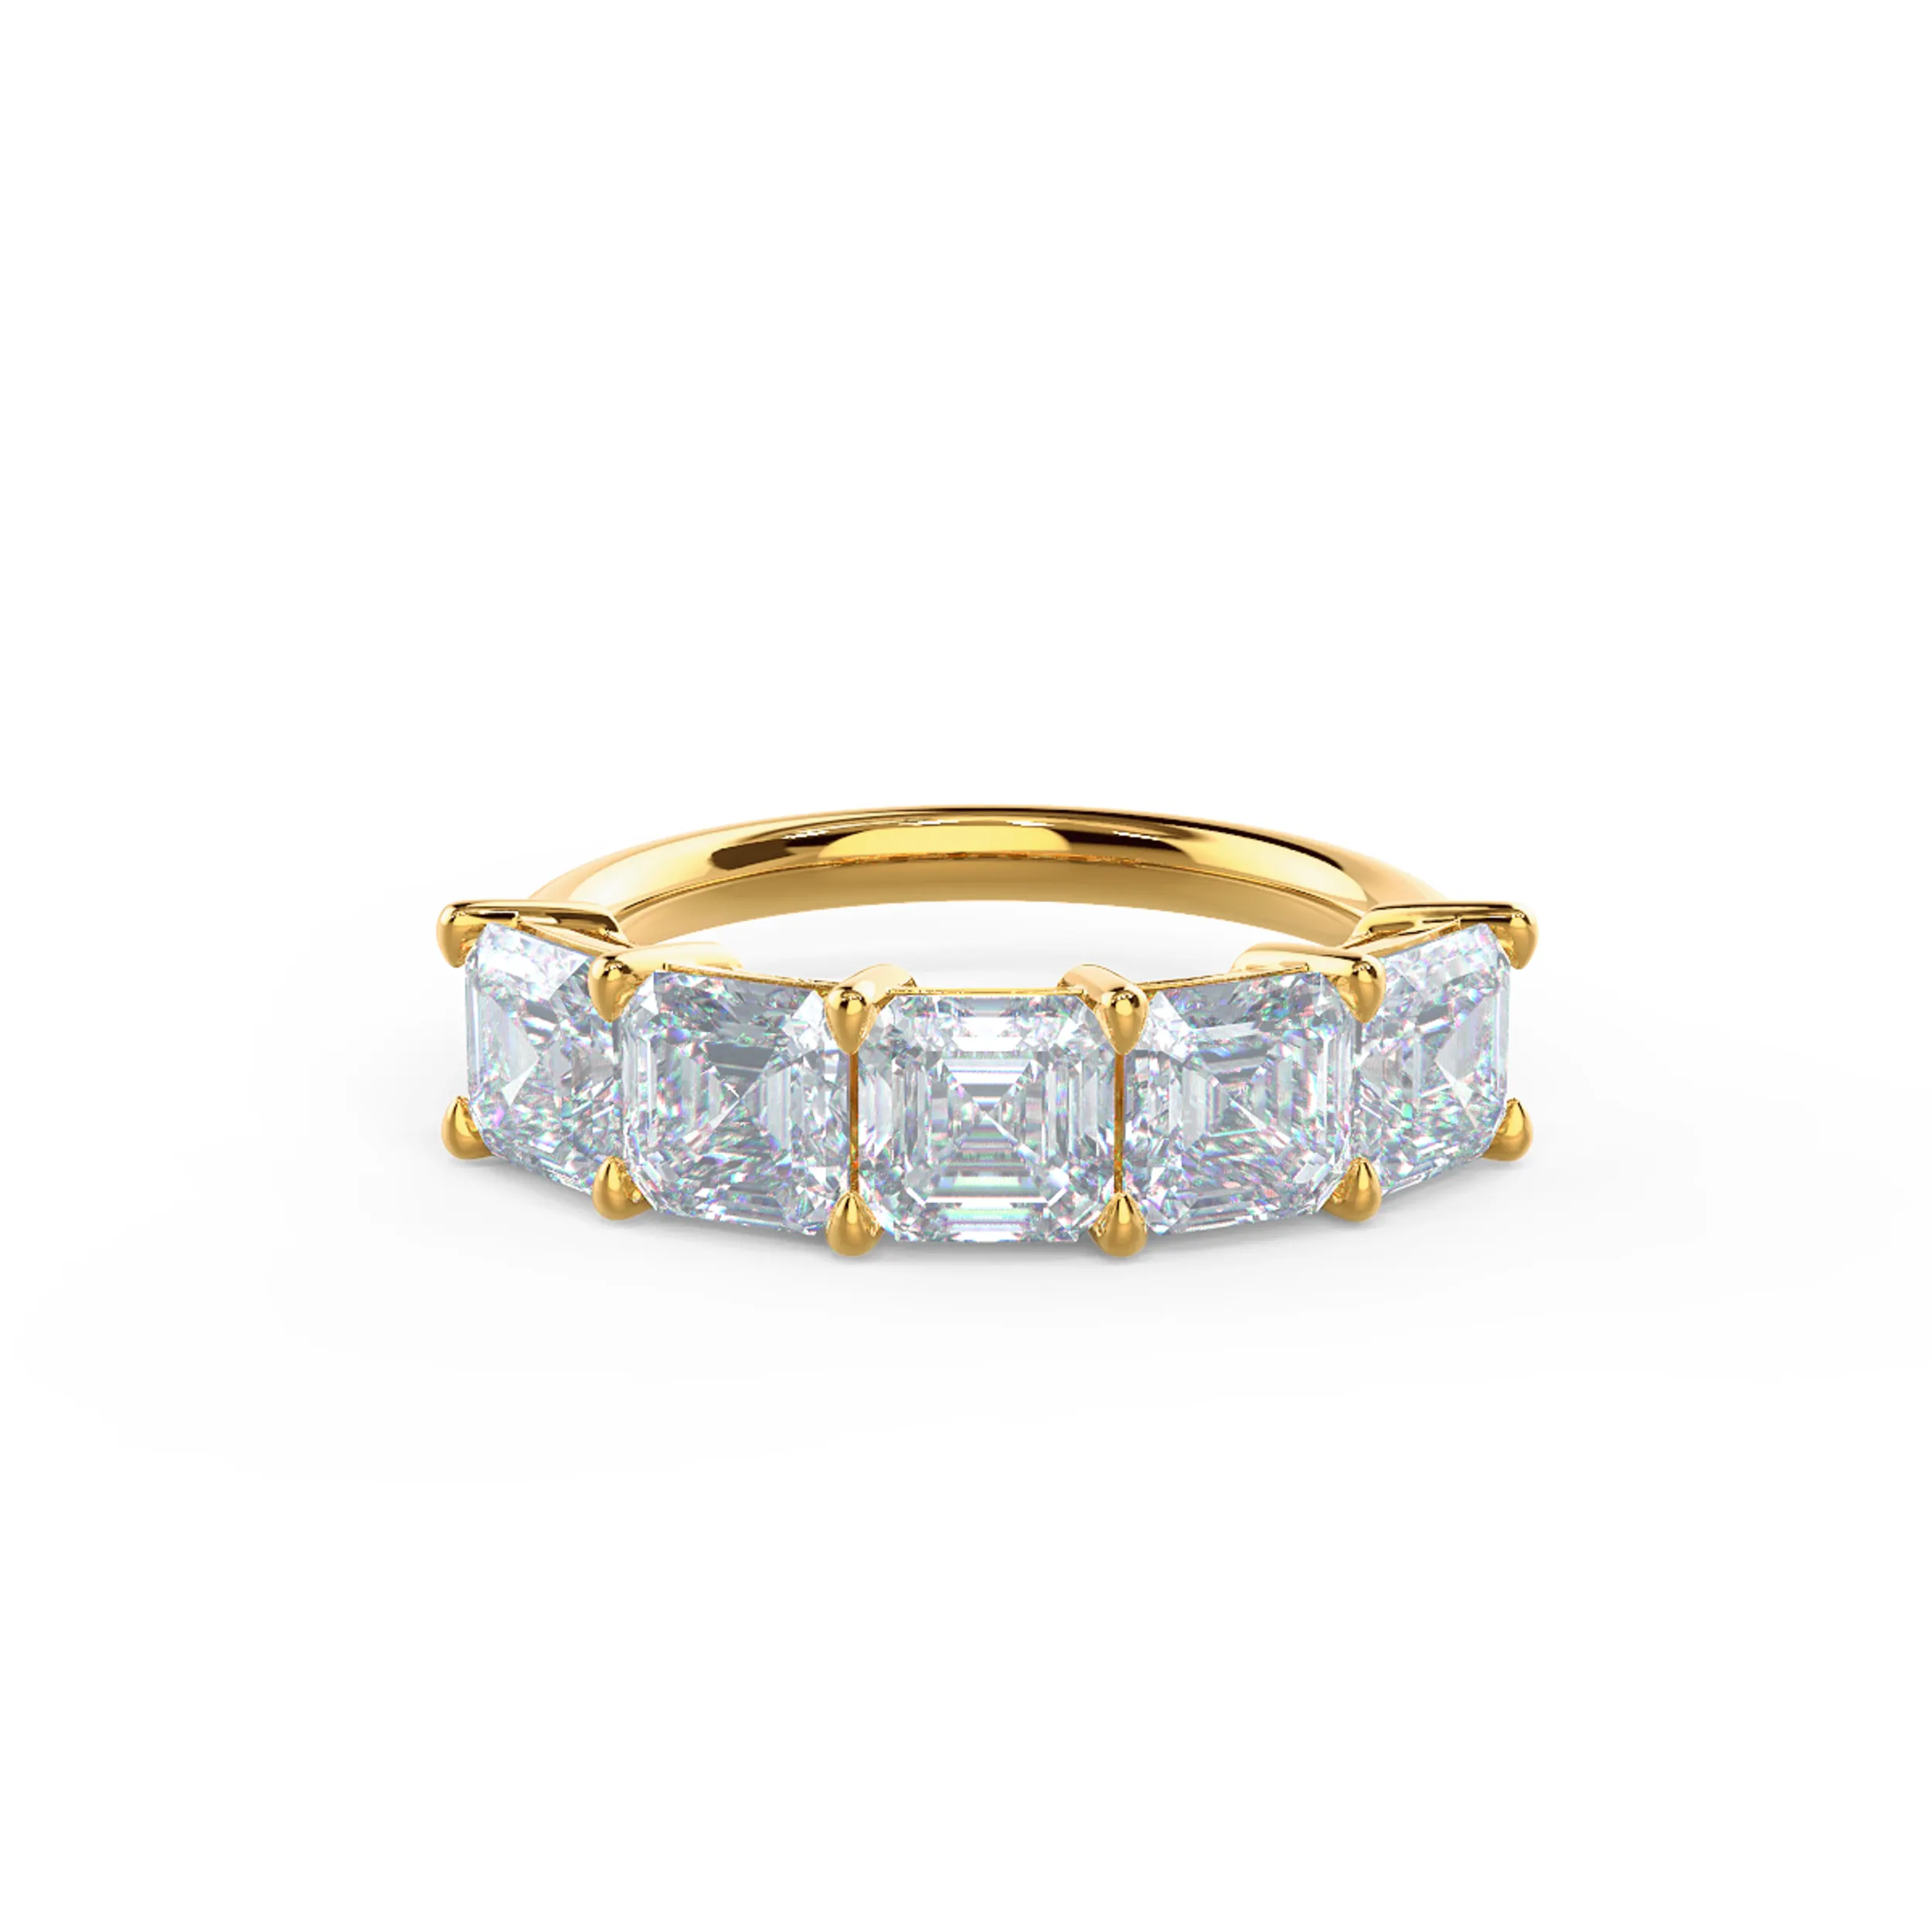 Exceptional Quality 3.5 ctw Lab Diamonds set in 14k Yellow Gold Asscher Cut Five-Stone Band (Main View)